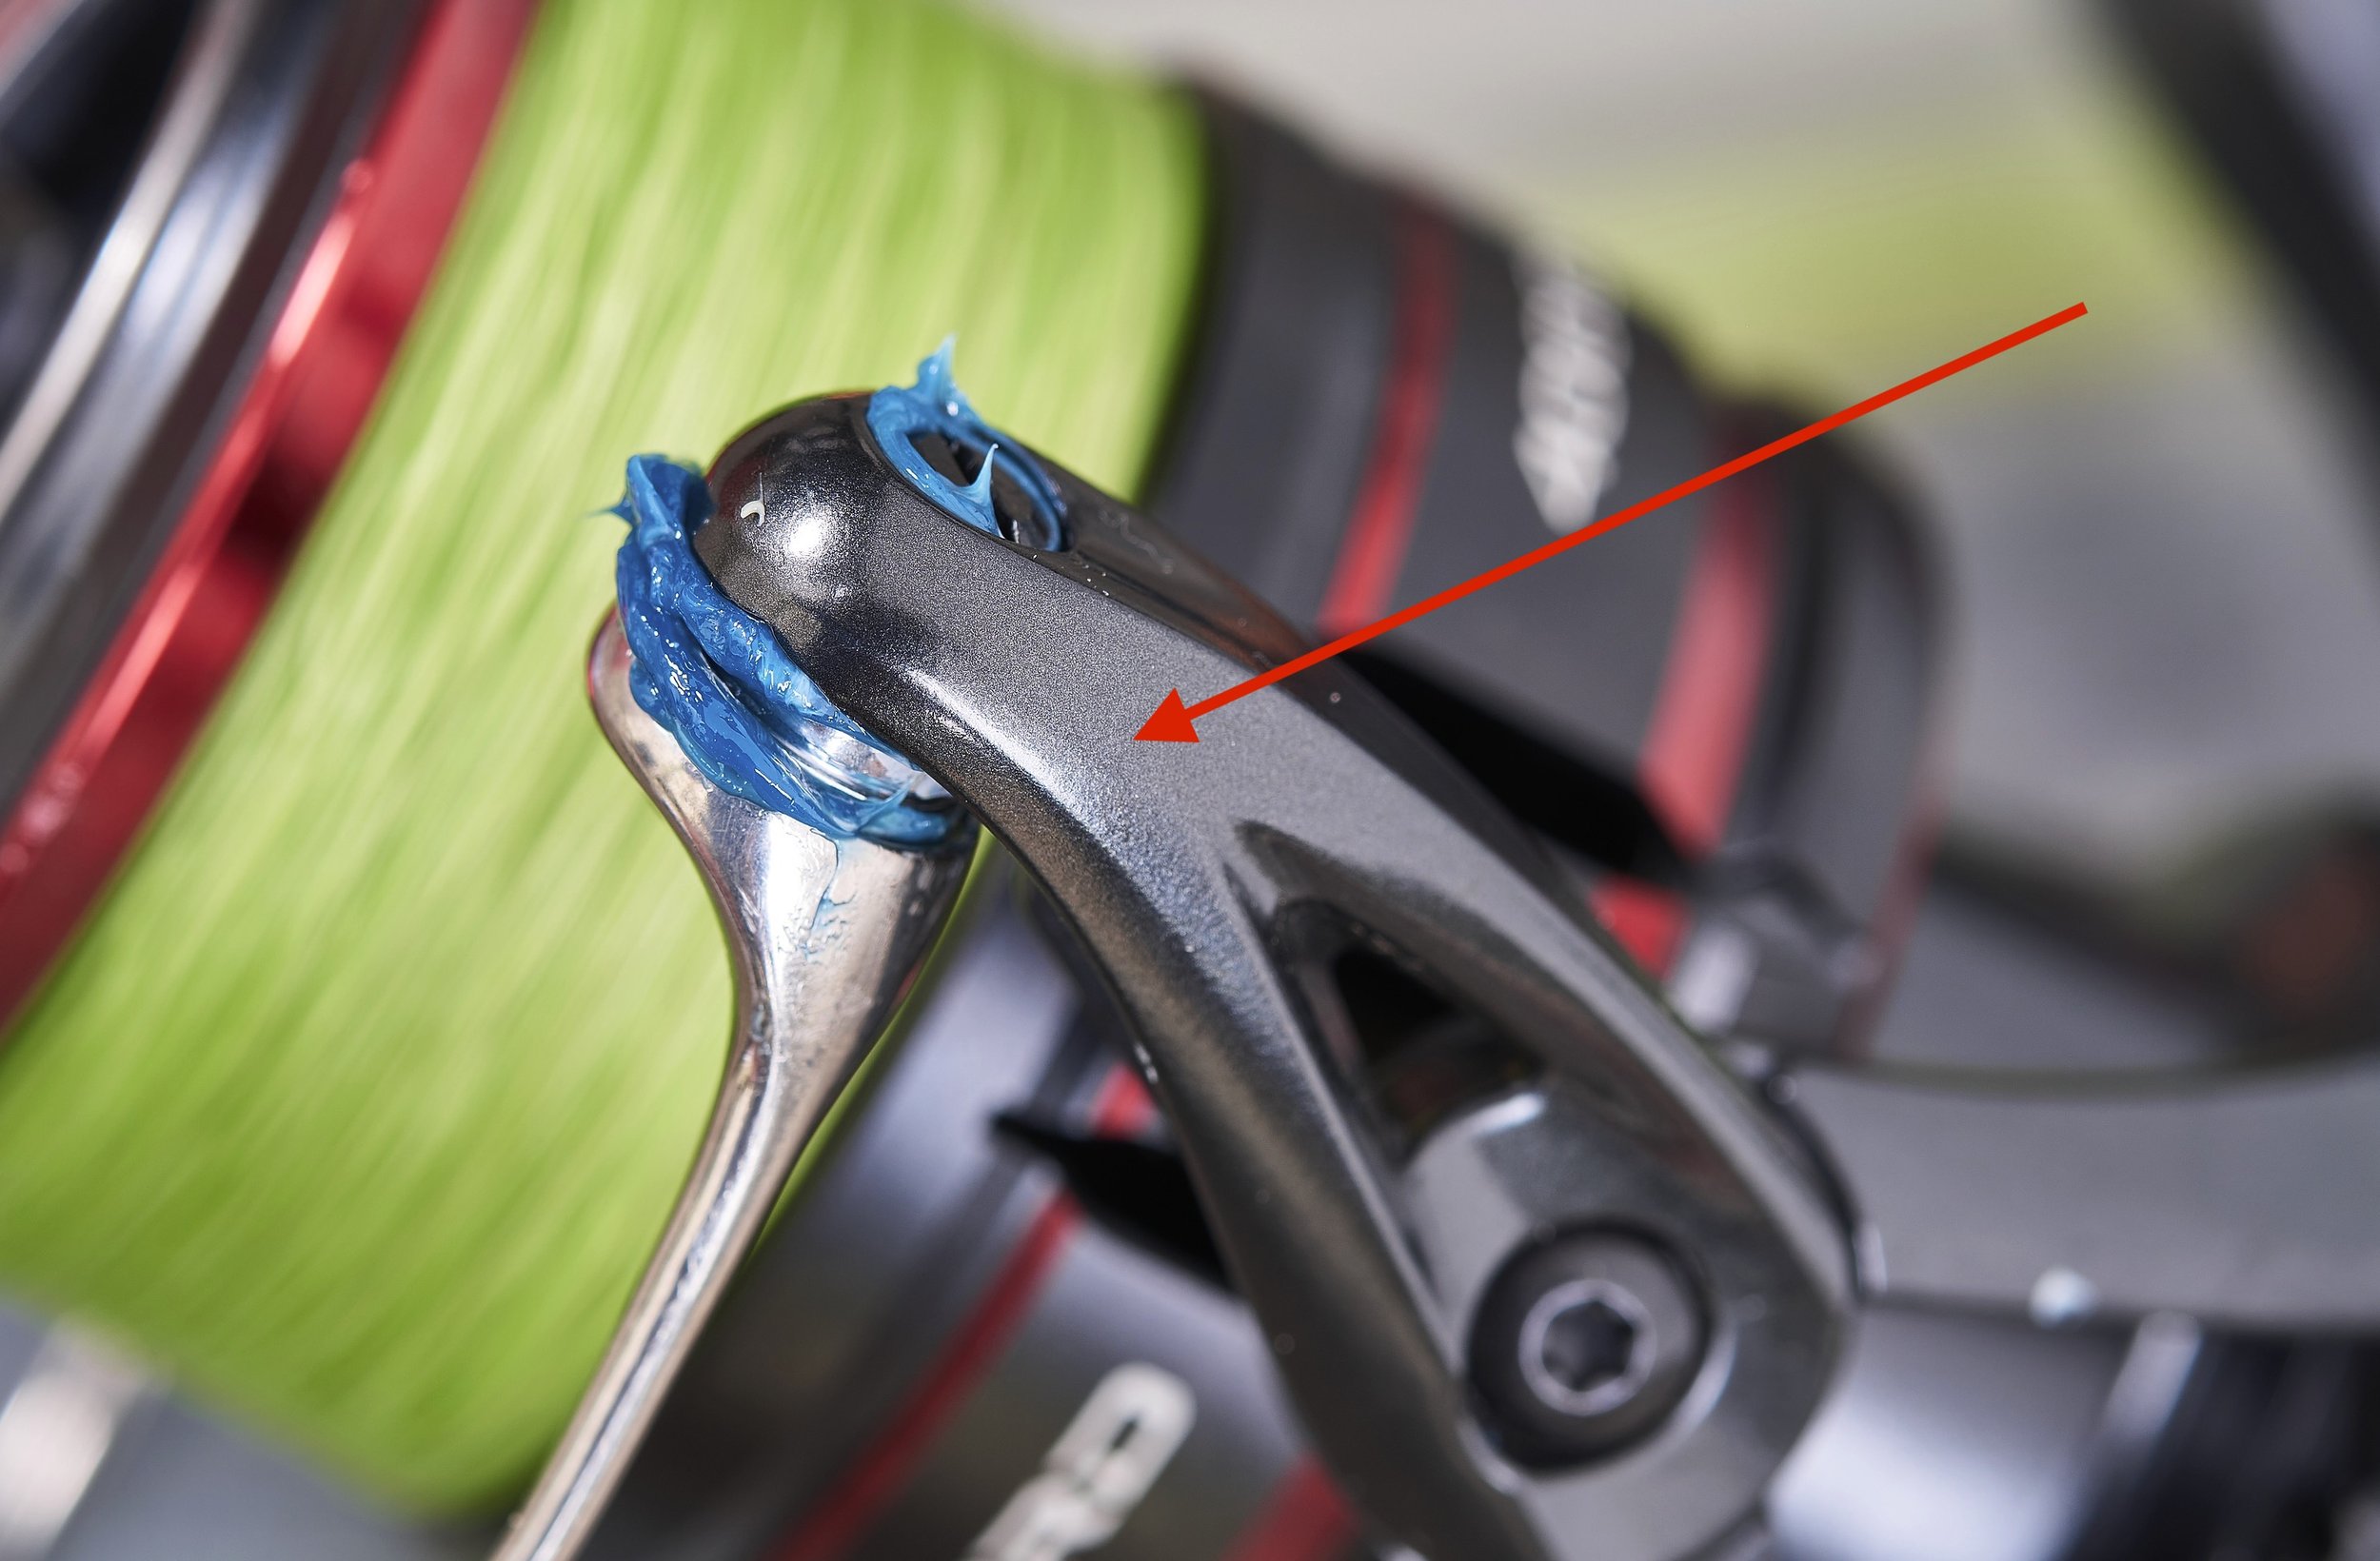 I always do these simple things to any spinning reel before I fish